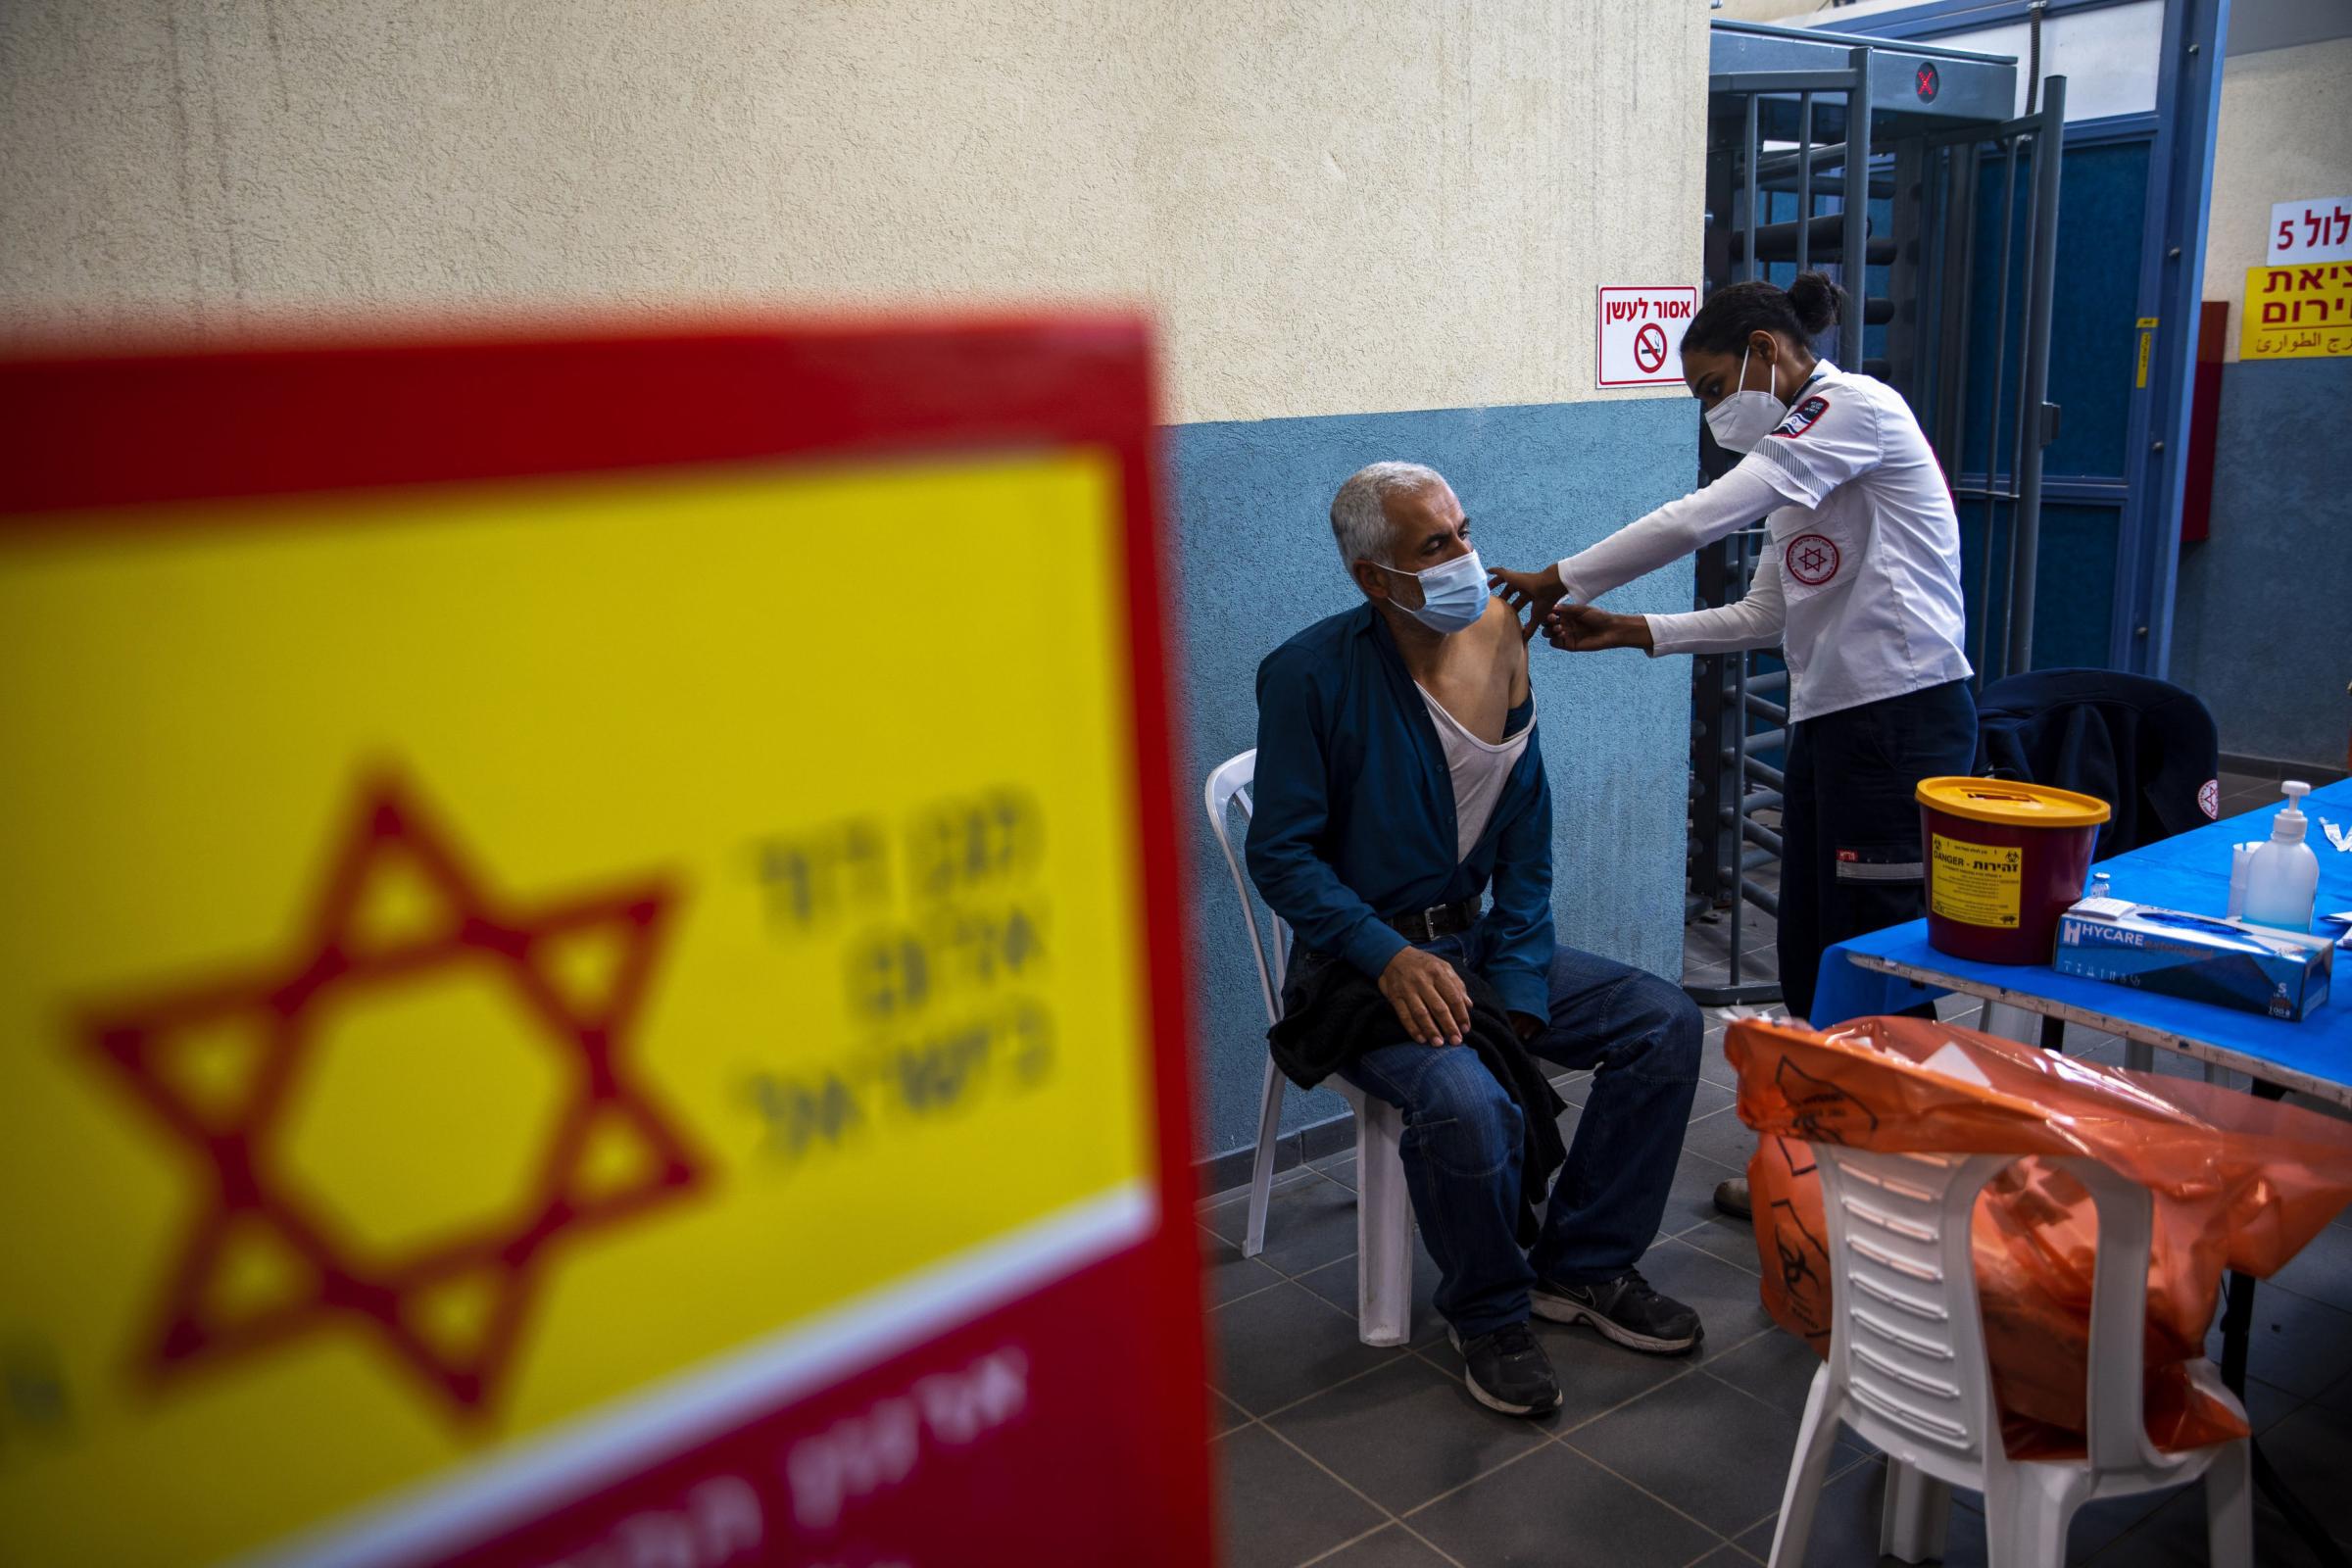 A Palestinian labourer who works in Israel receives his first dose of the Moderna Covid-19 vaccine at a coronavirus vaccination center set up at the Meitar checkpoint crossing between Israel and the West Bank, south of the West Bank town of Hebron